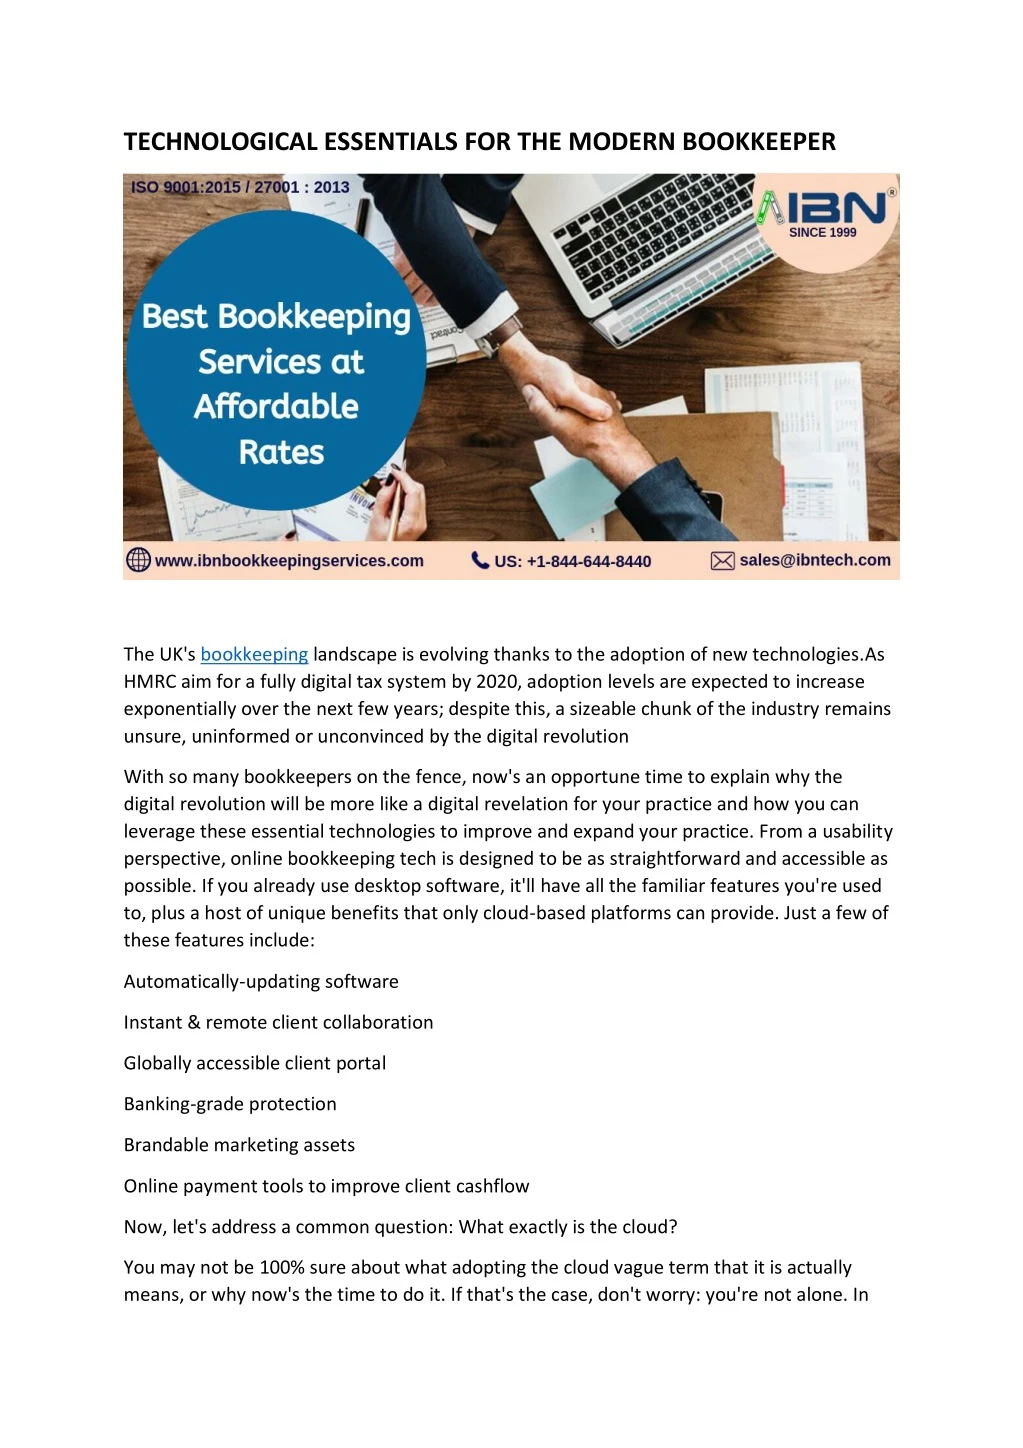 technological essentials for the modern bookkeeper